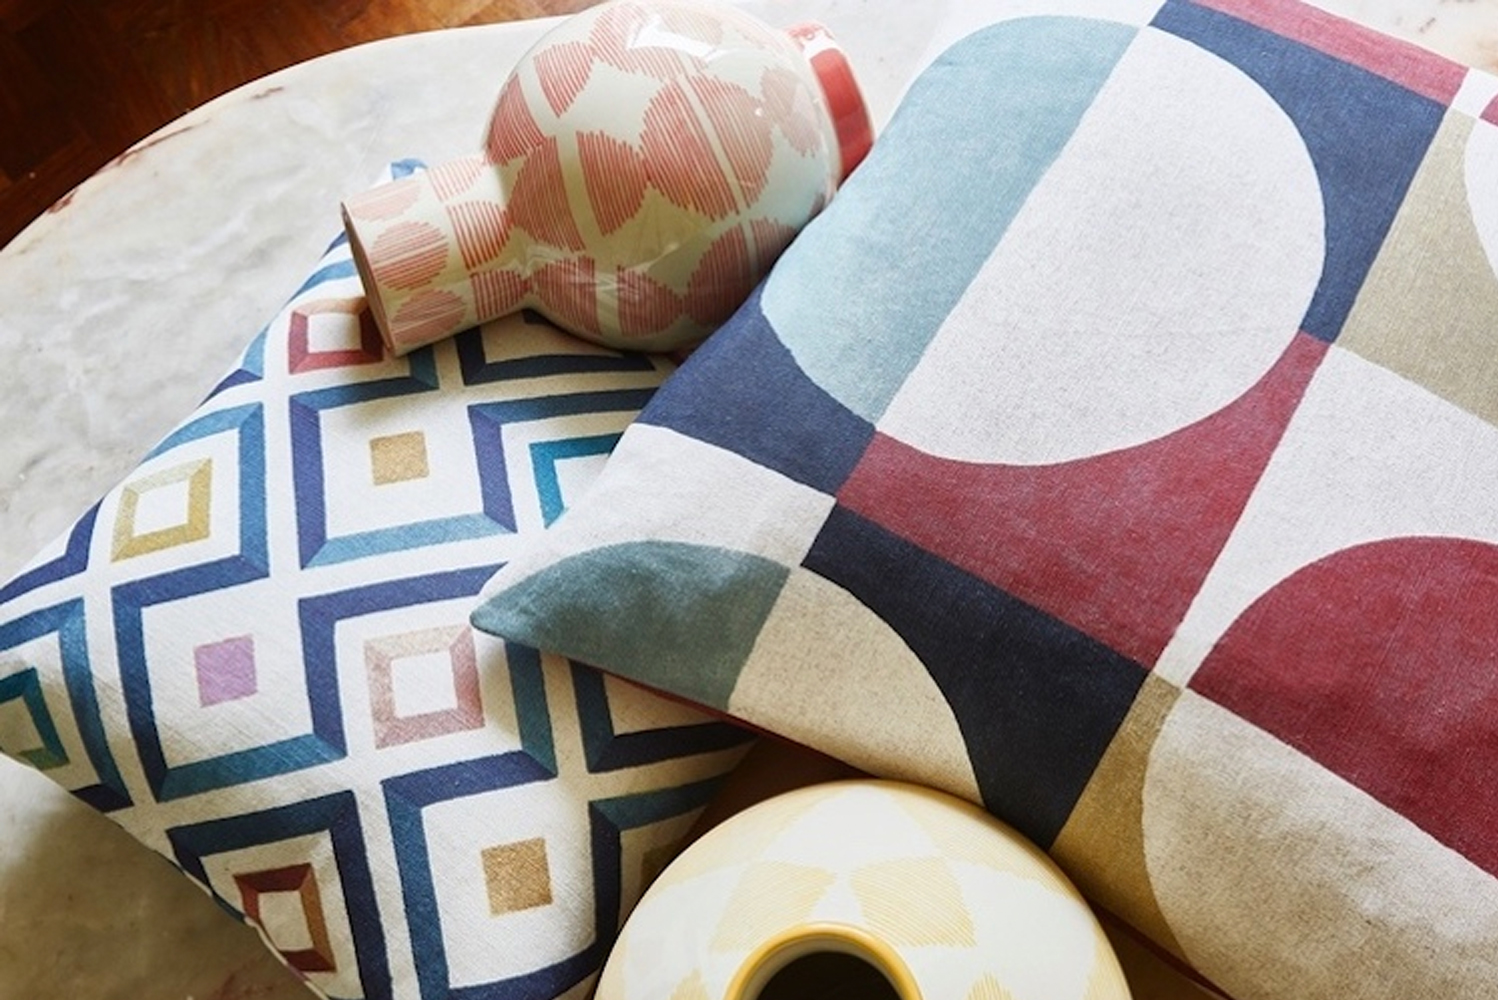 UK-based textile firm Prestigious Textiles launched the Abstract collection